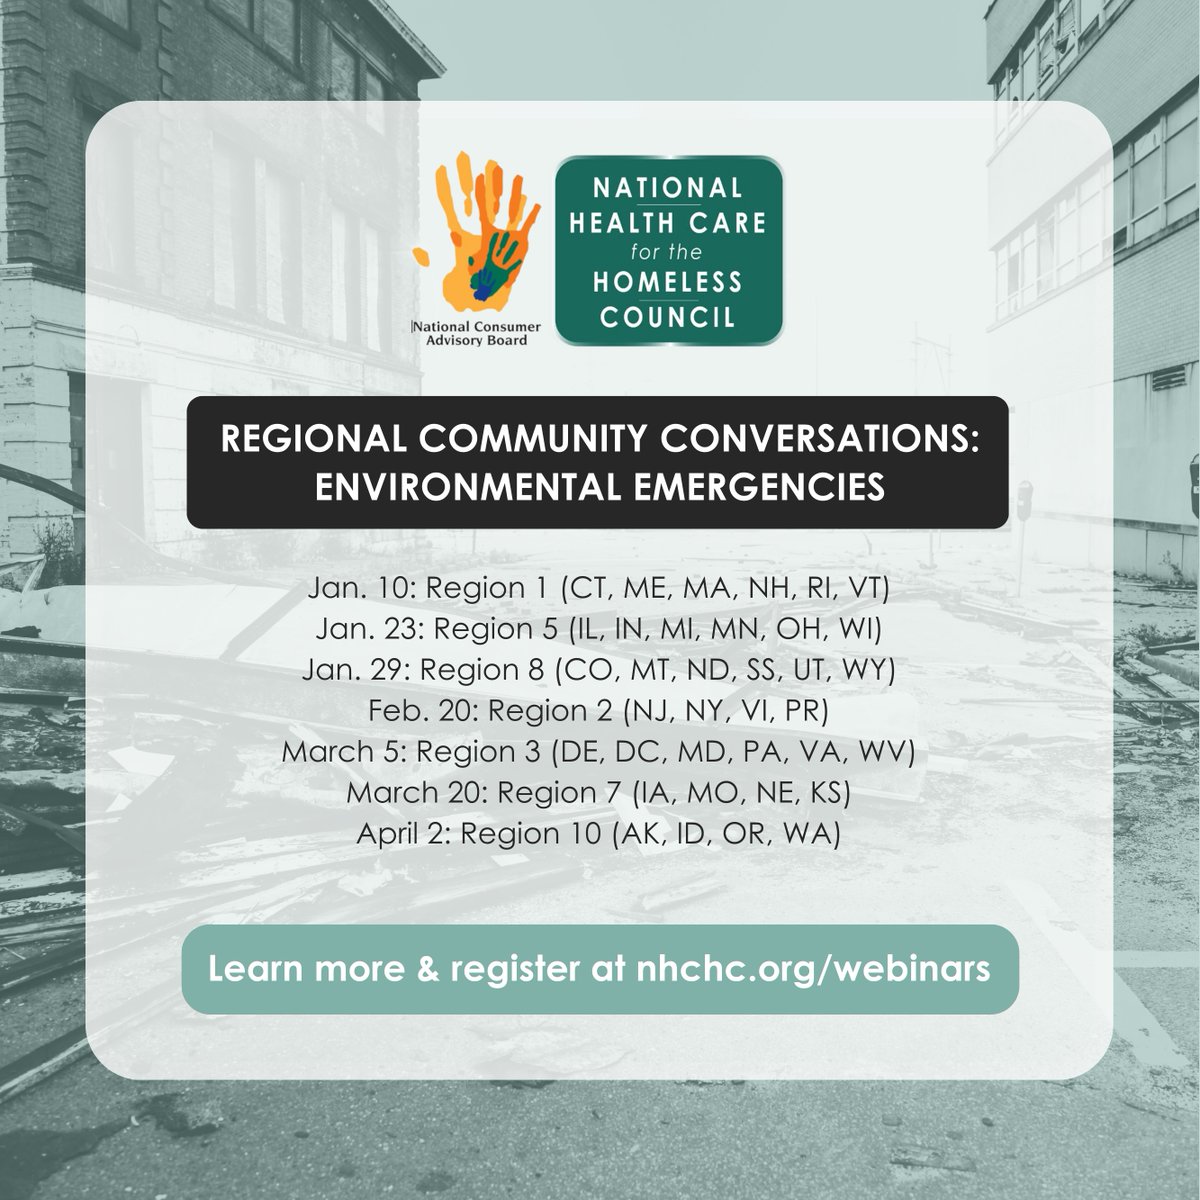 We're looking for people with lived experience of homelessness to join us for regional conversations about the best ways to support the unhoused in an environmental emergency. Learn more and please share these links with those who may wish to participate: ow.ly/WXuE50Qojop